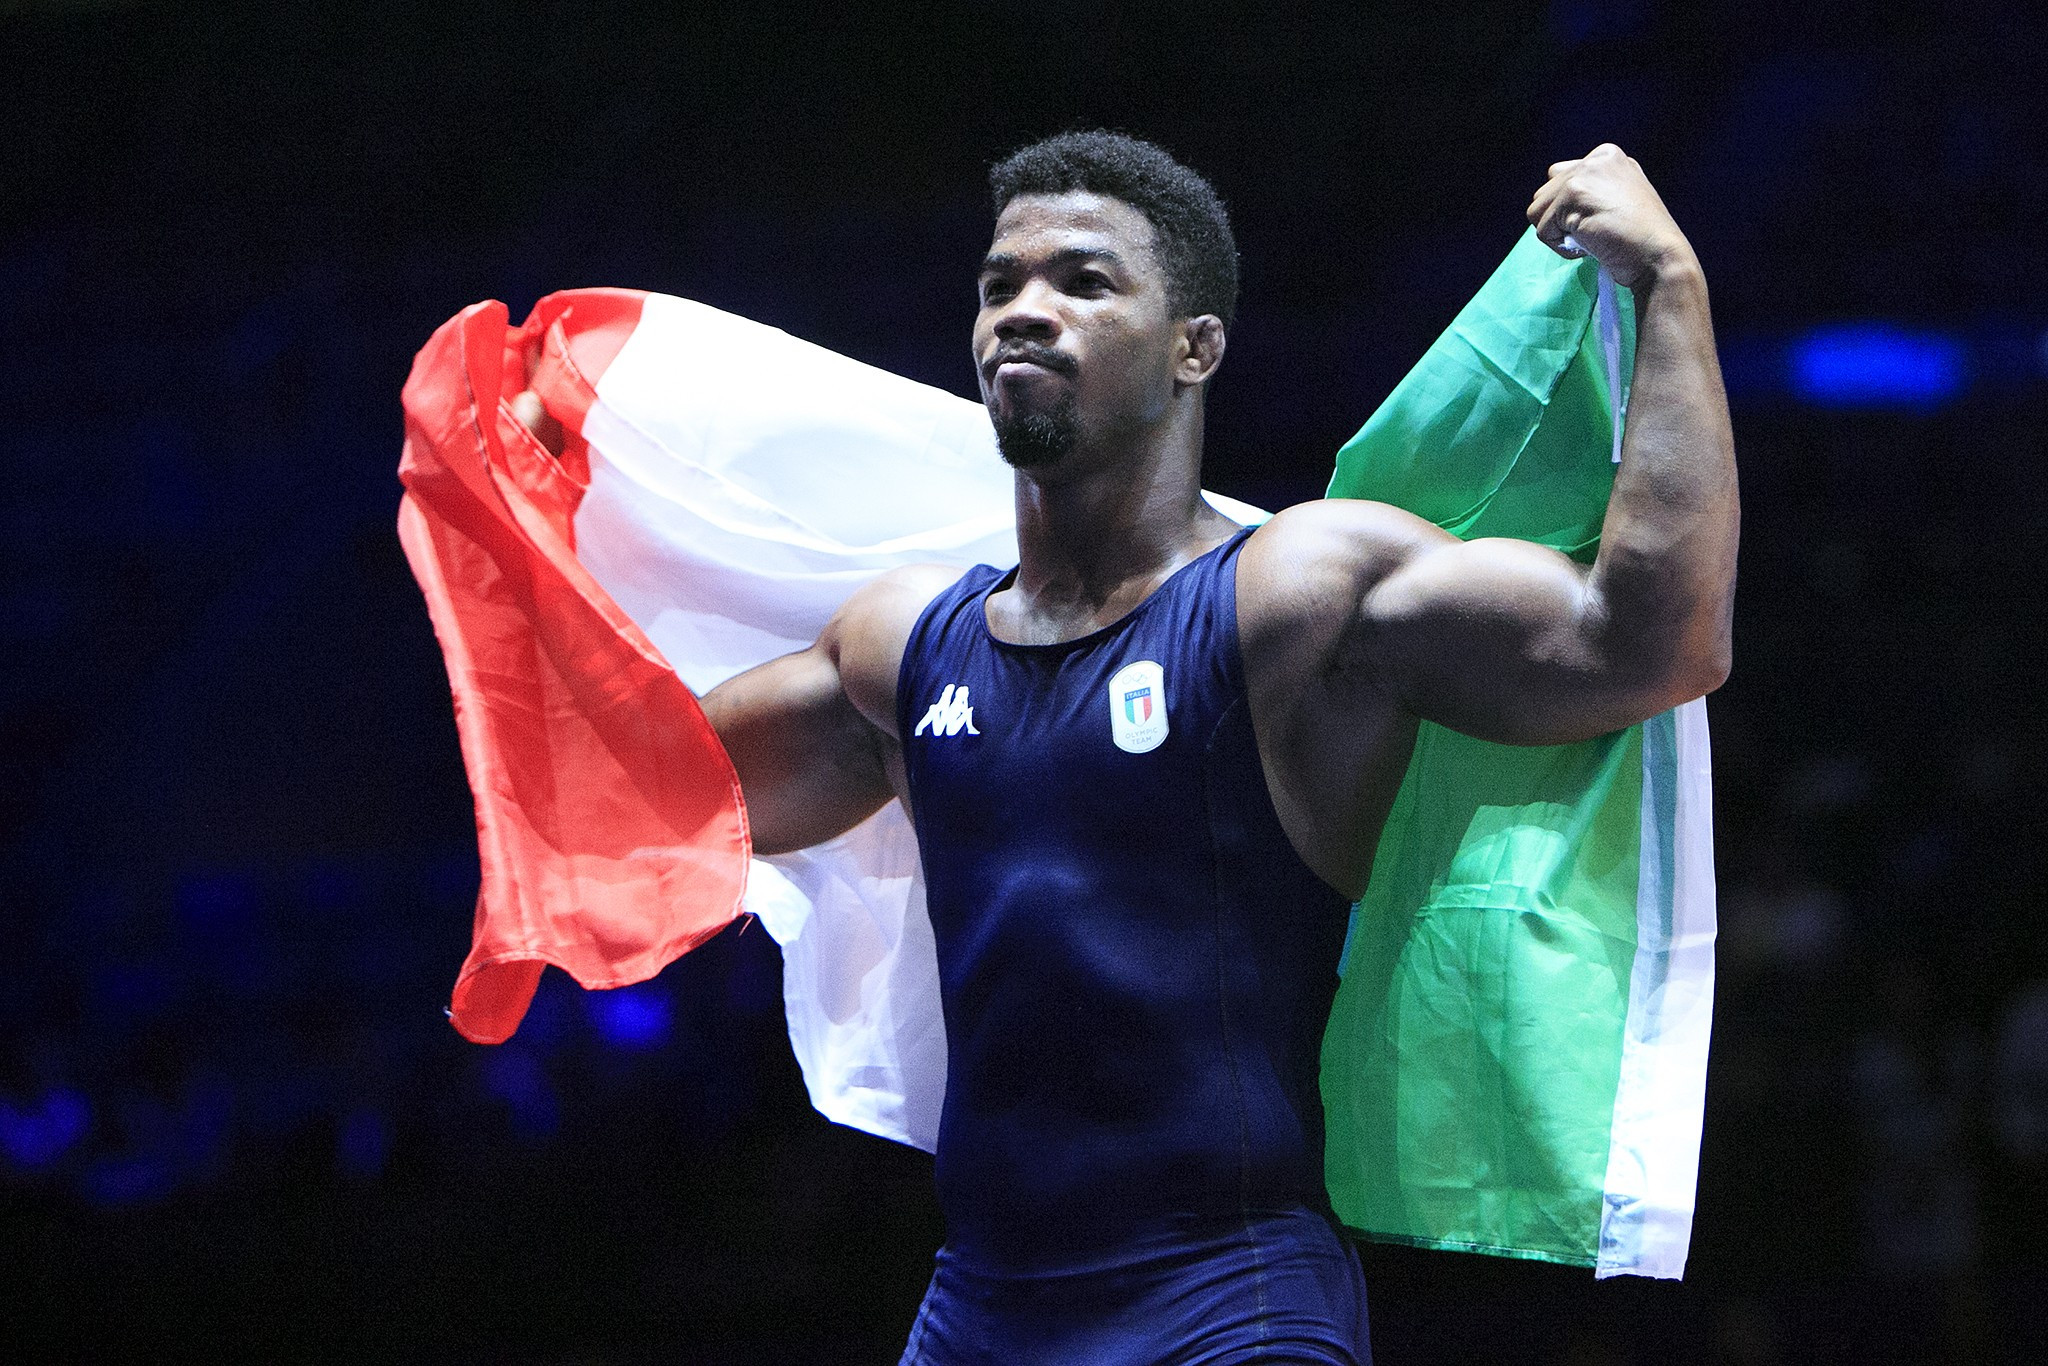 The victory for Chamizo handed him a second world title after he triumphed at 65kg in 2015 ©UWW